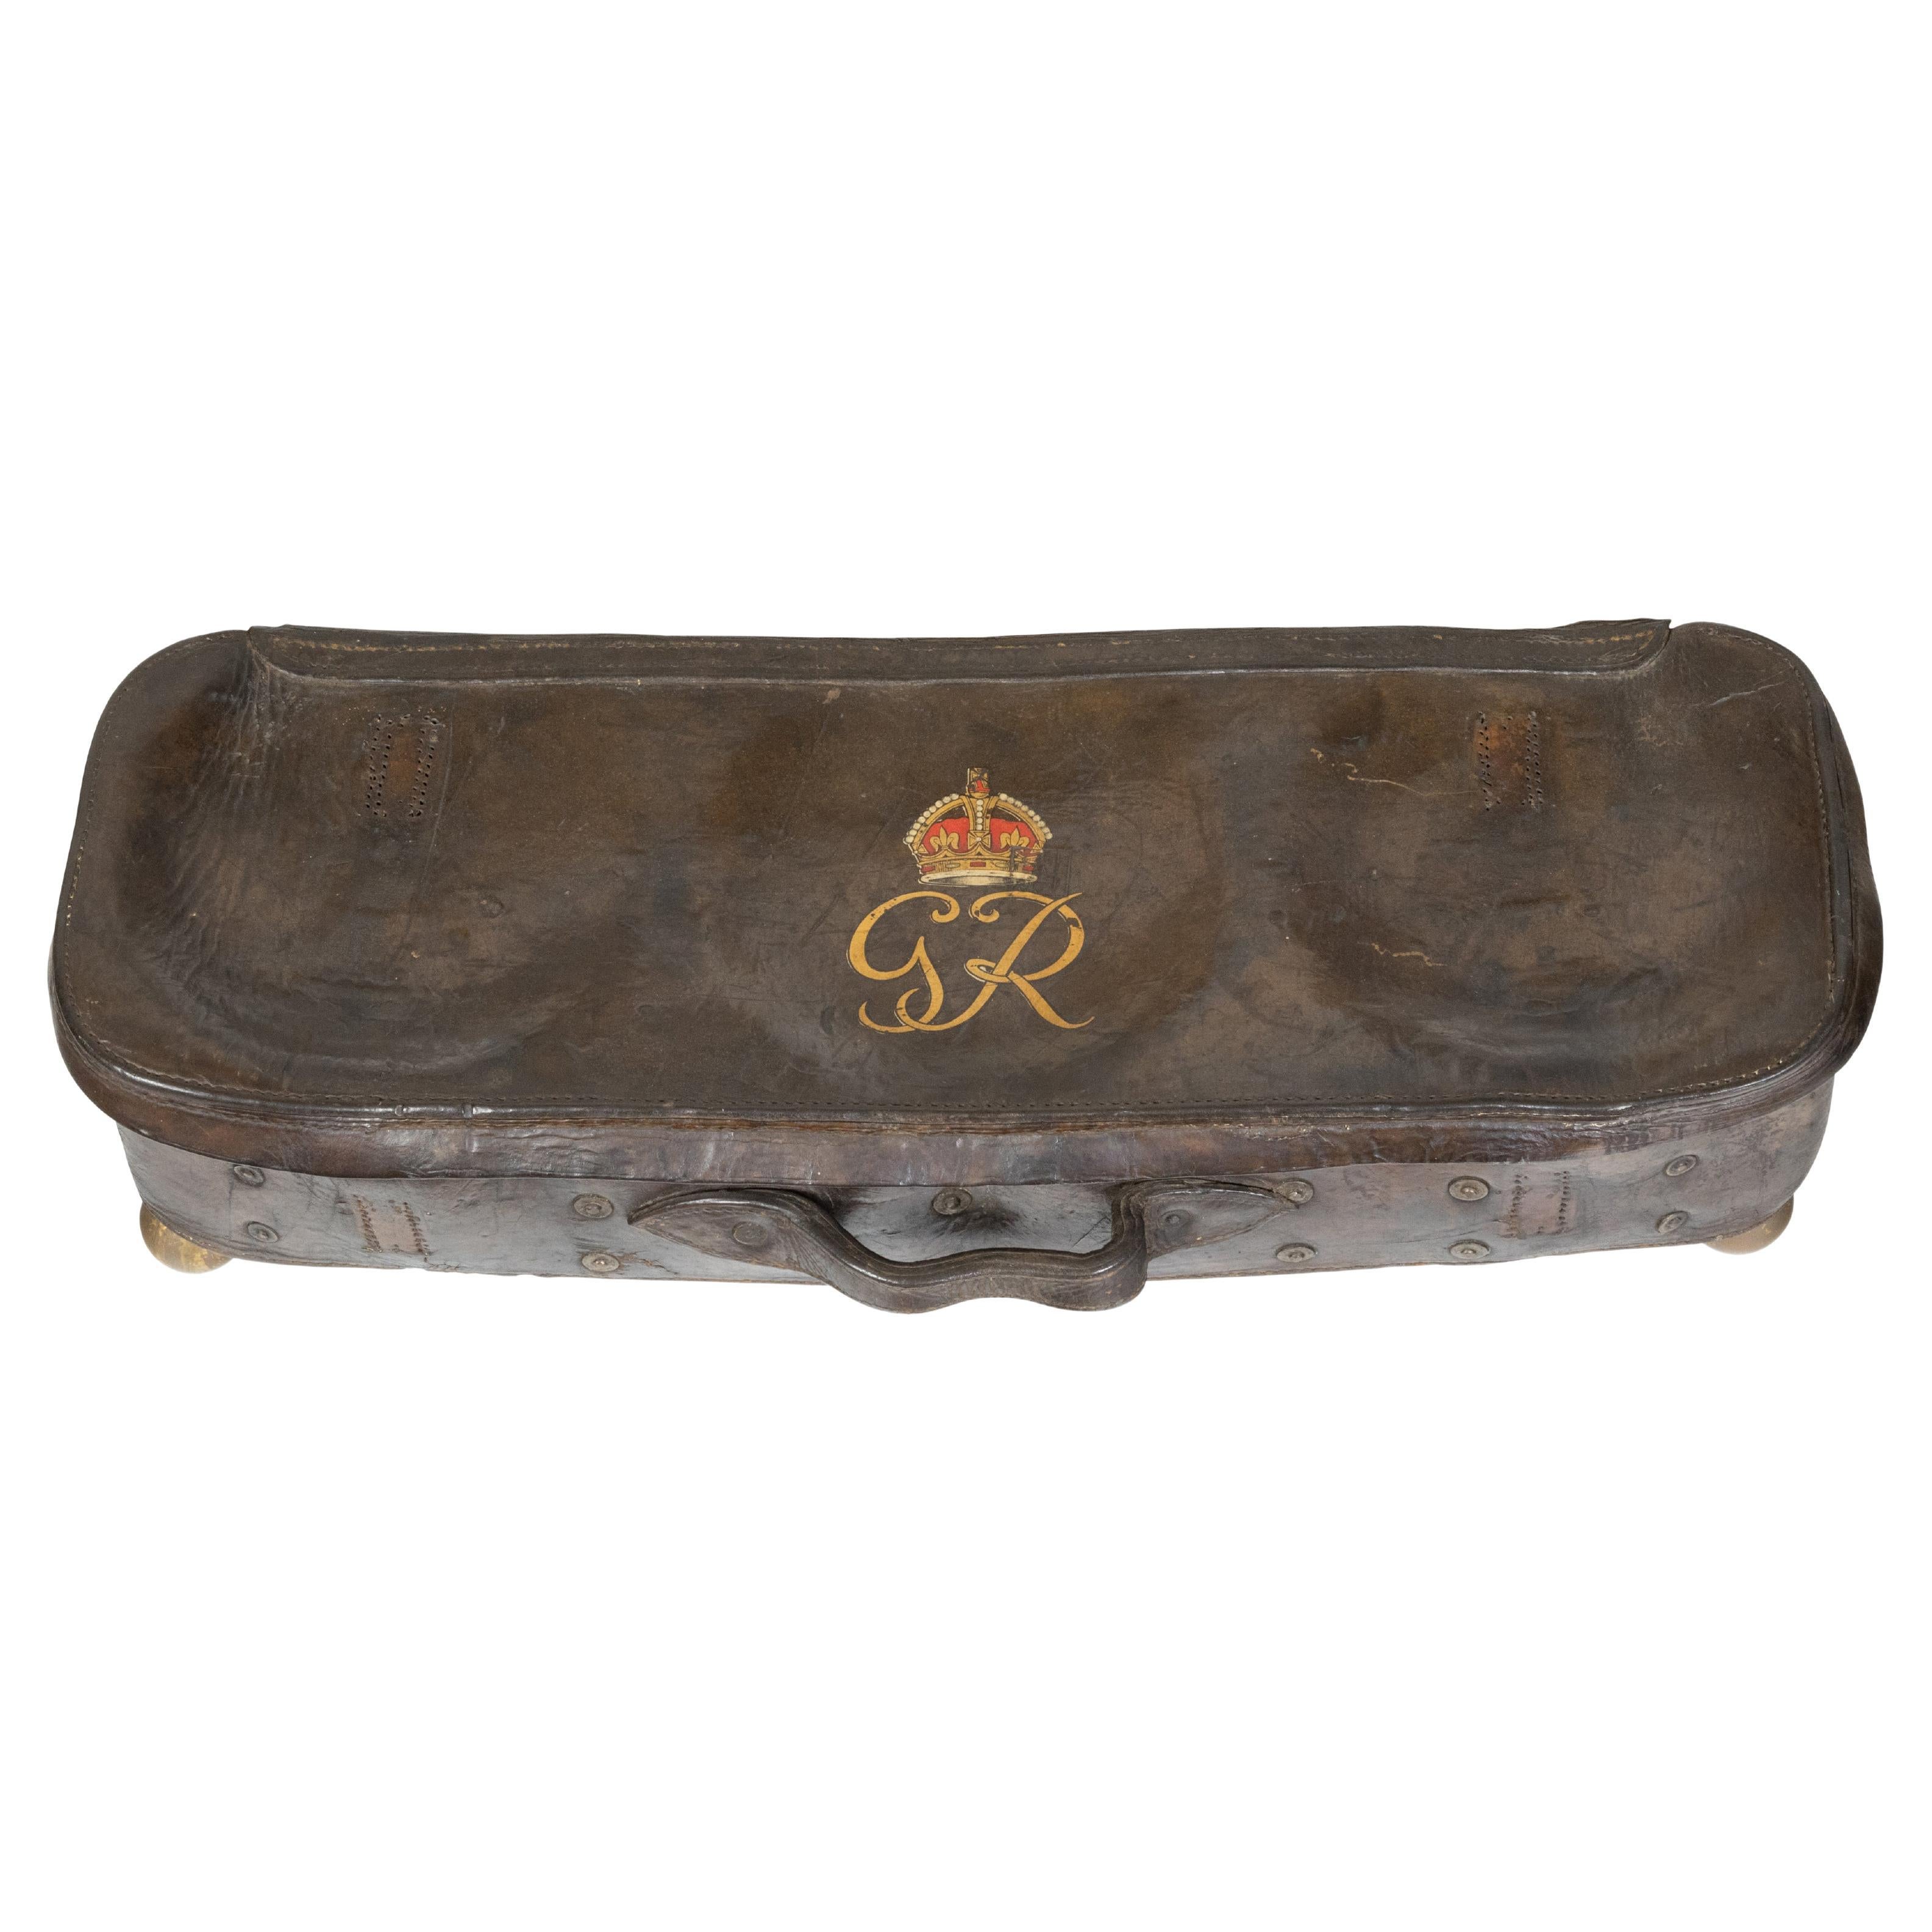 English 19th Century Brown Leather Case with GR Crowned Monogram and Ball Feet